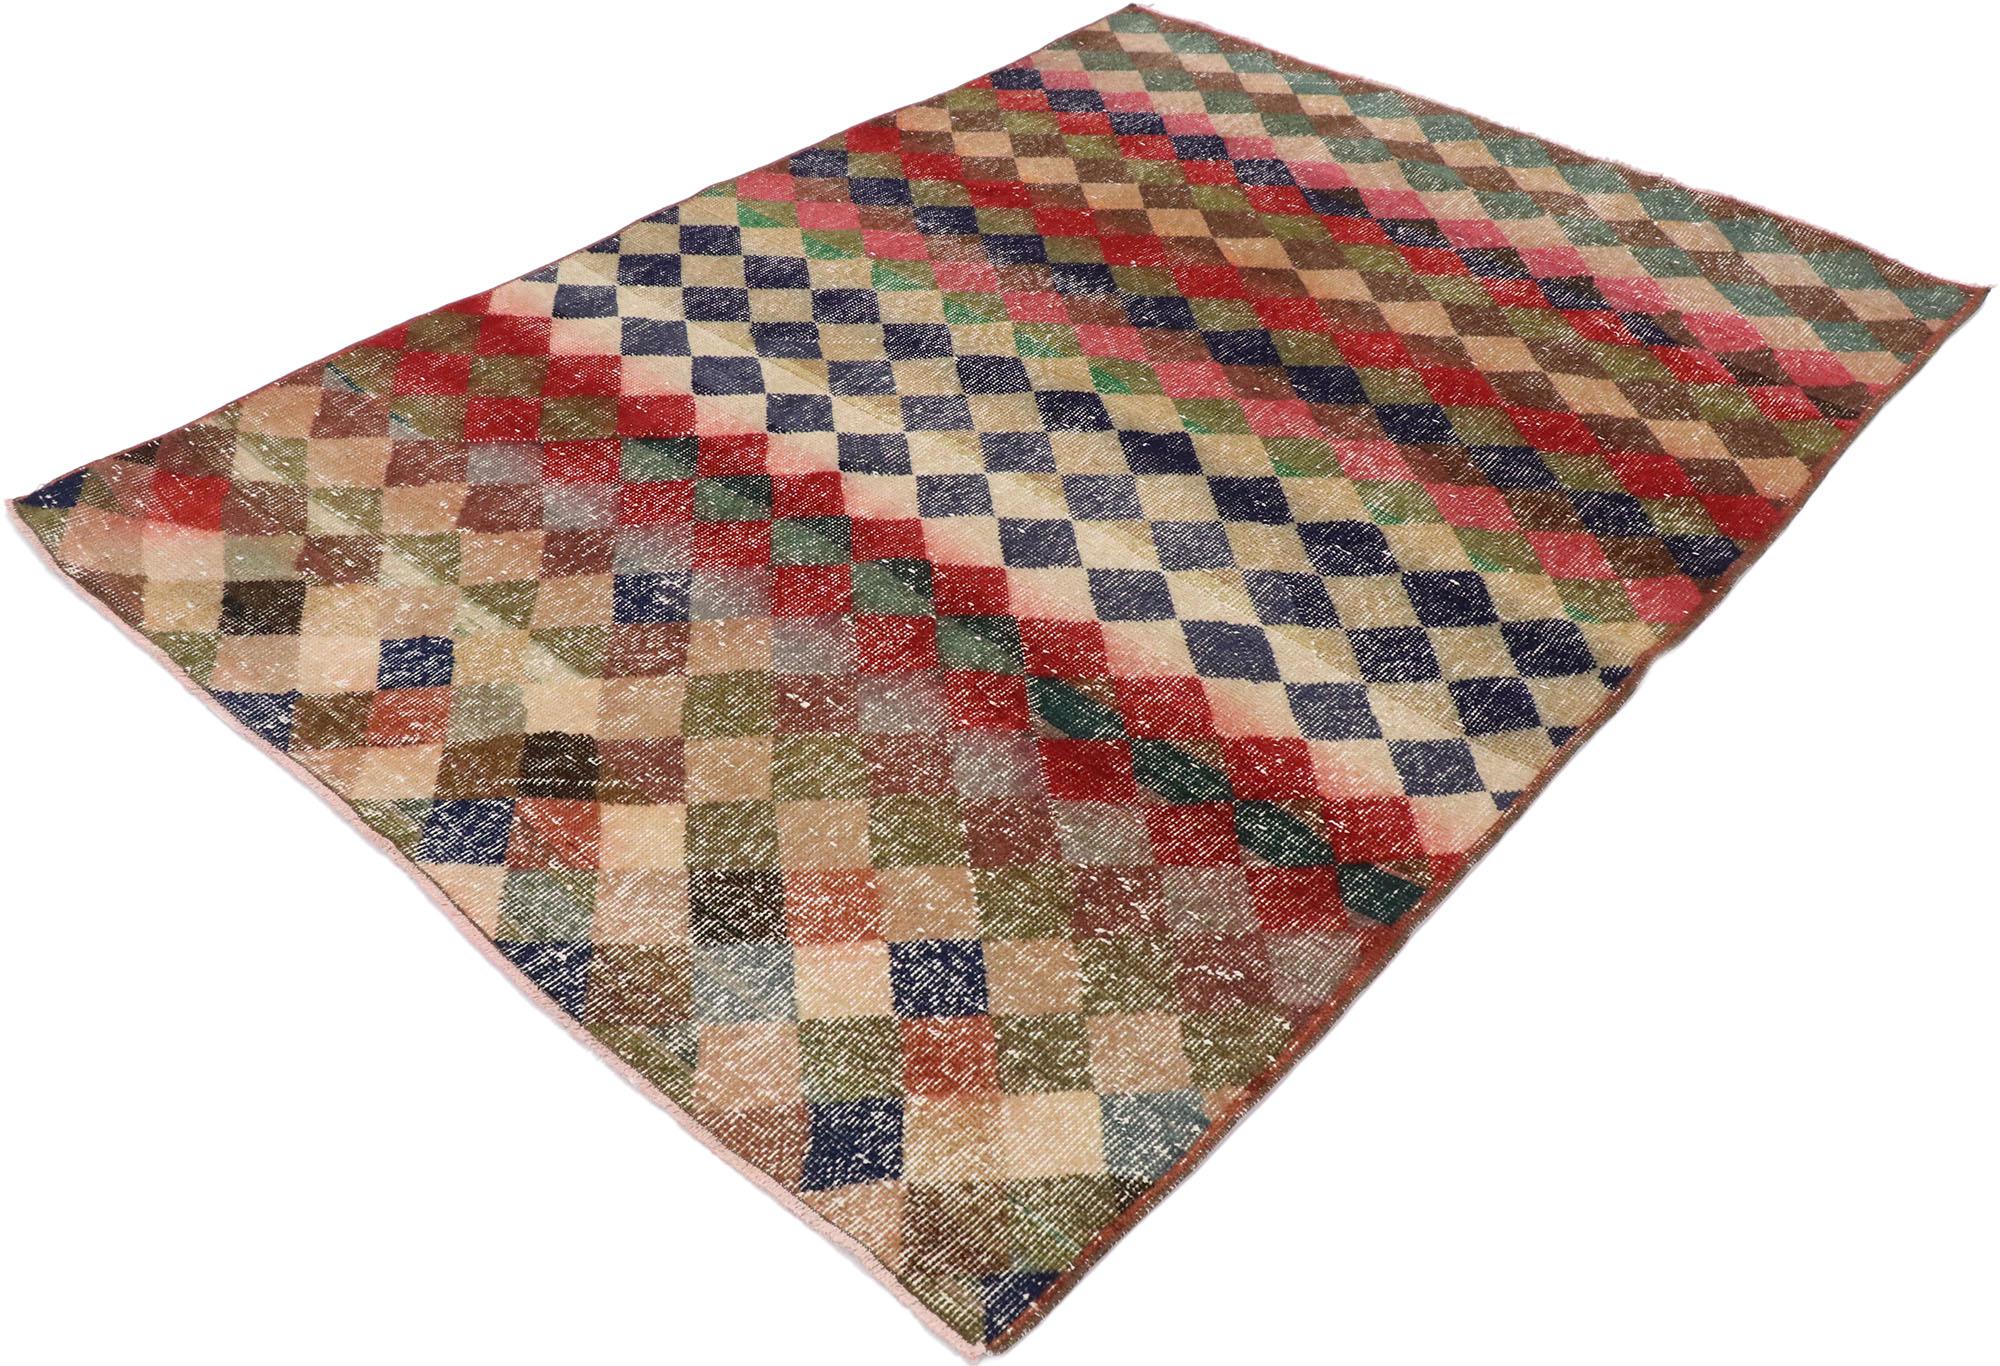 53353, distressed vintage Turkish Sivas rug with Mid-Century Modern rustic style. This hand knotted wool distressed vintage Turkish Sivas rug features an all-over checkered stripe pattern comprised of rows of multicolored diamonds. Each row of